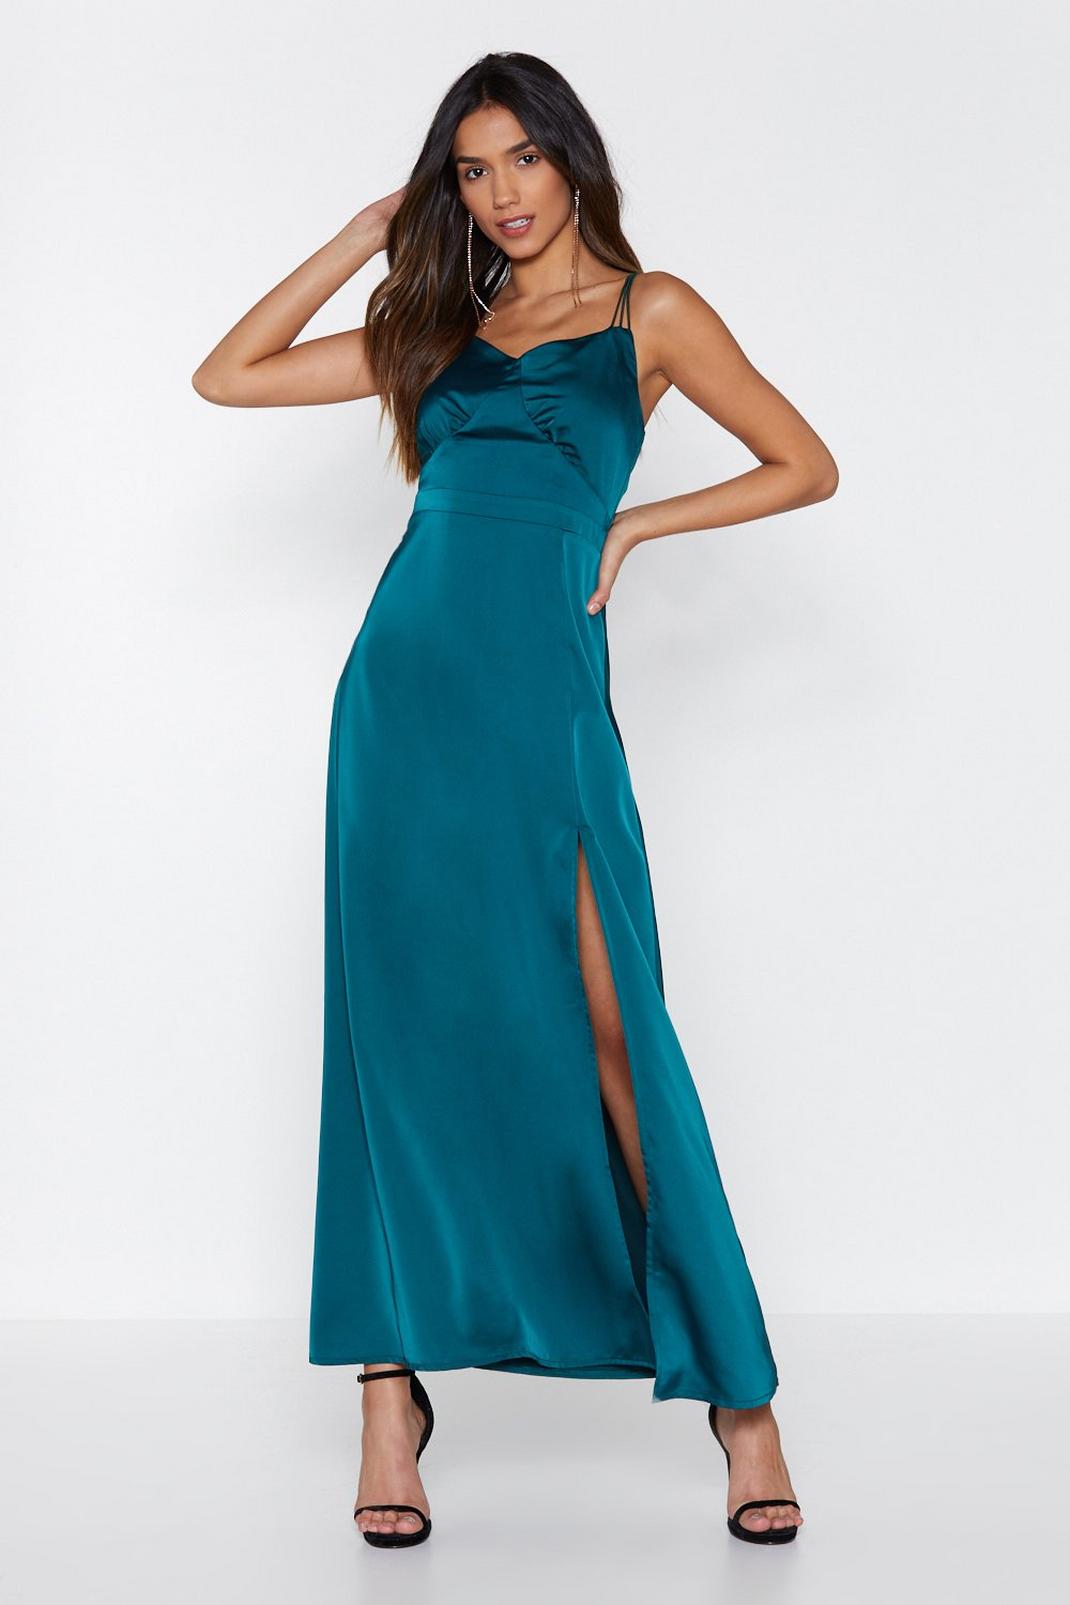 Own It Satin Dress image number 1